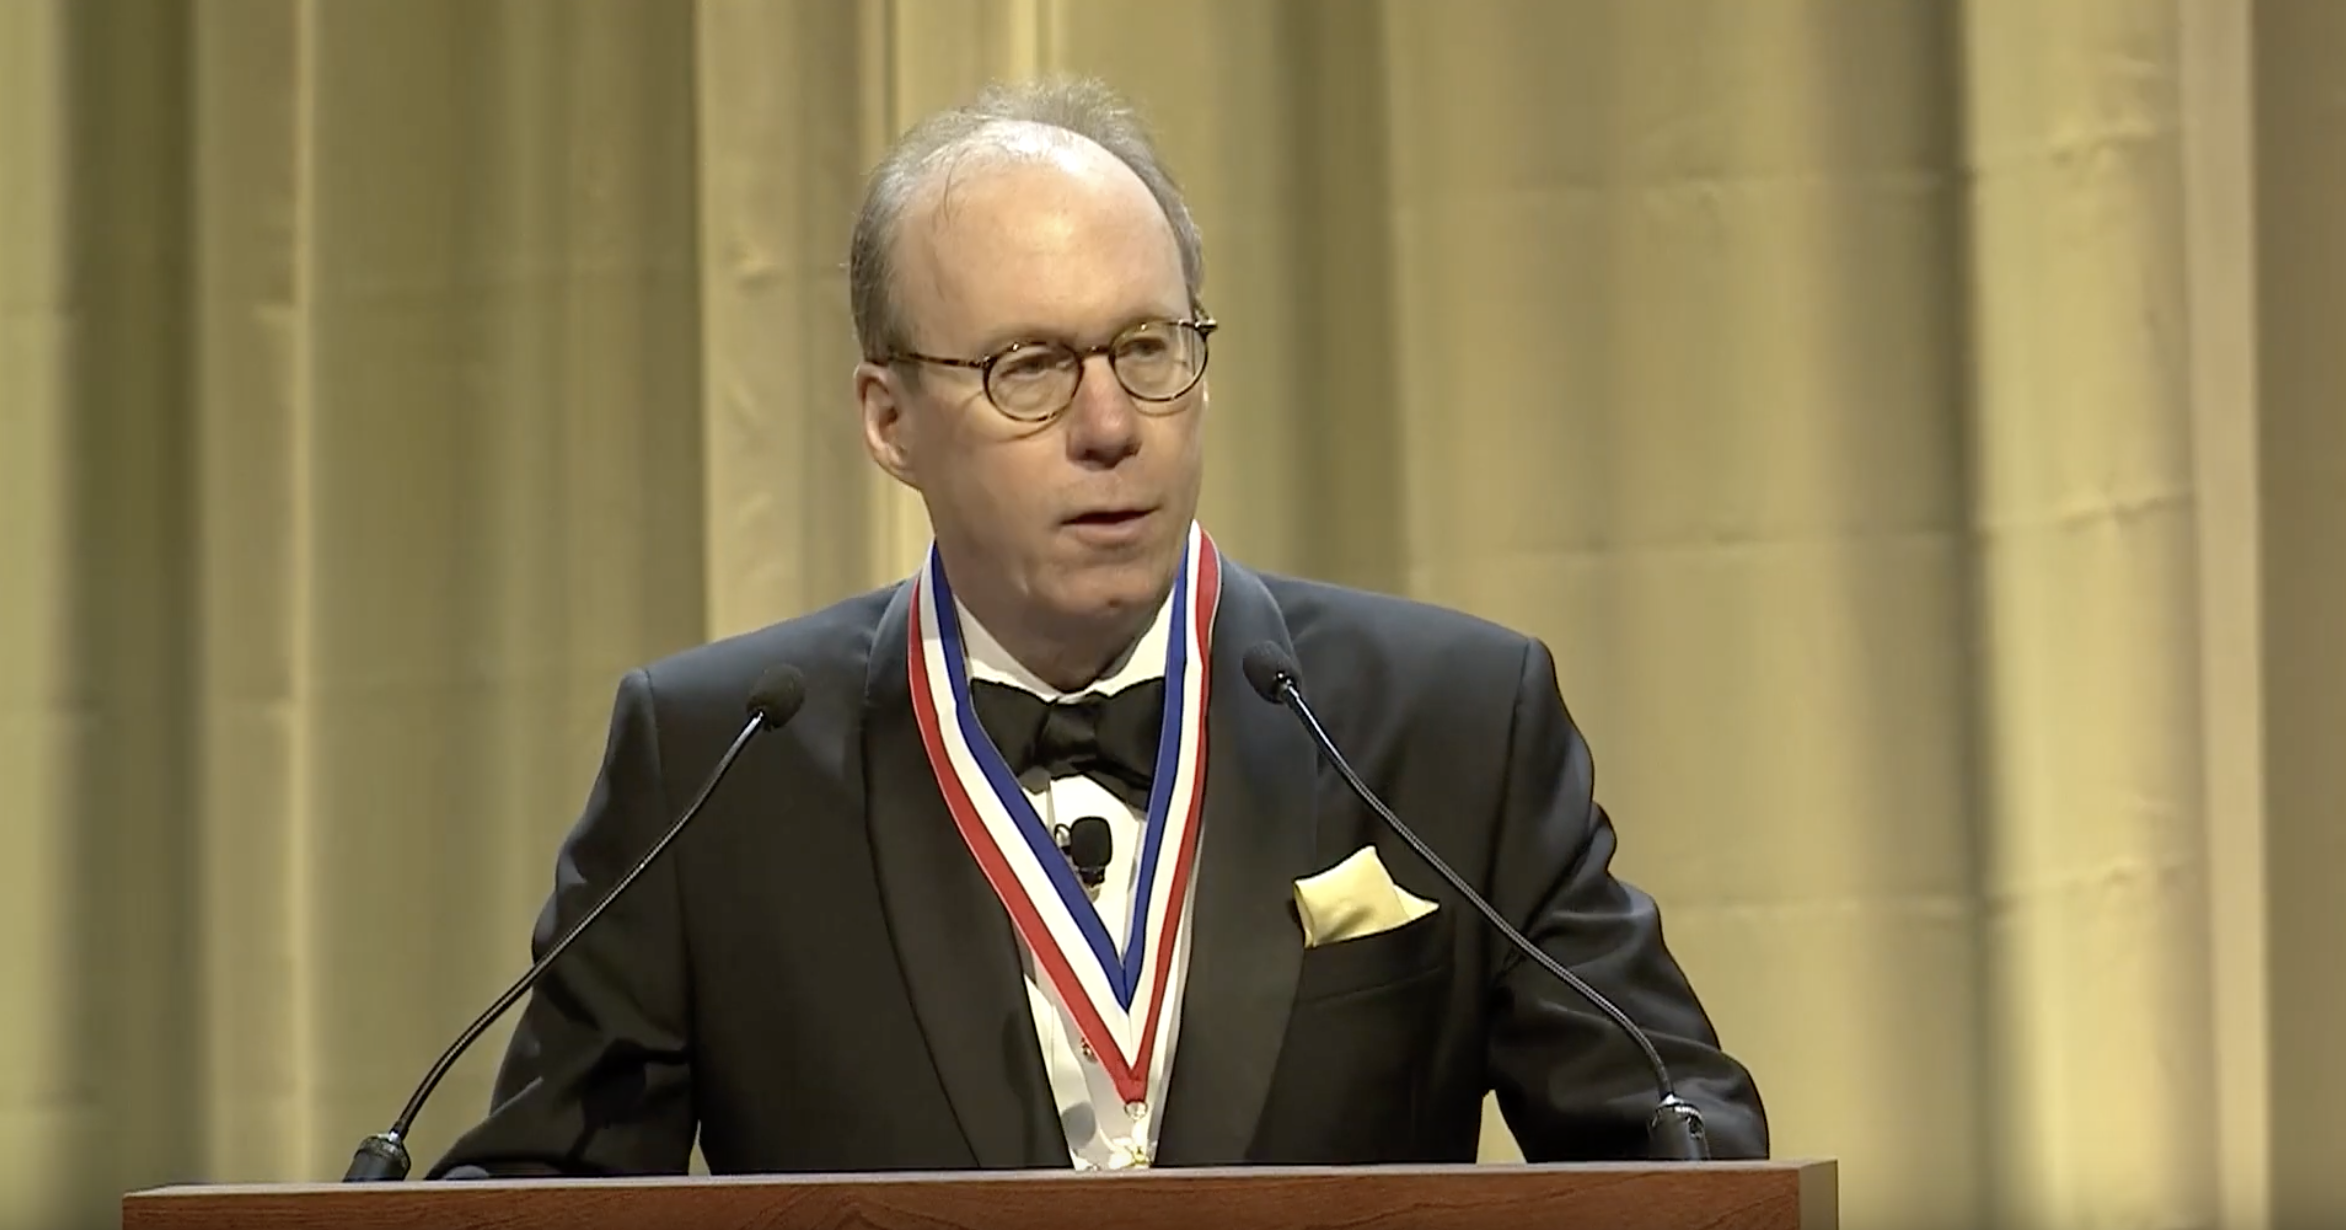 Roger Kimball receives the 2019 Bradley Prize